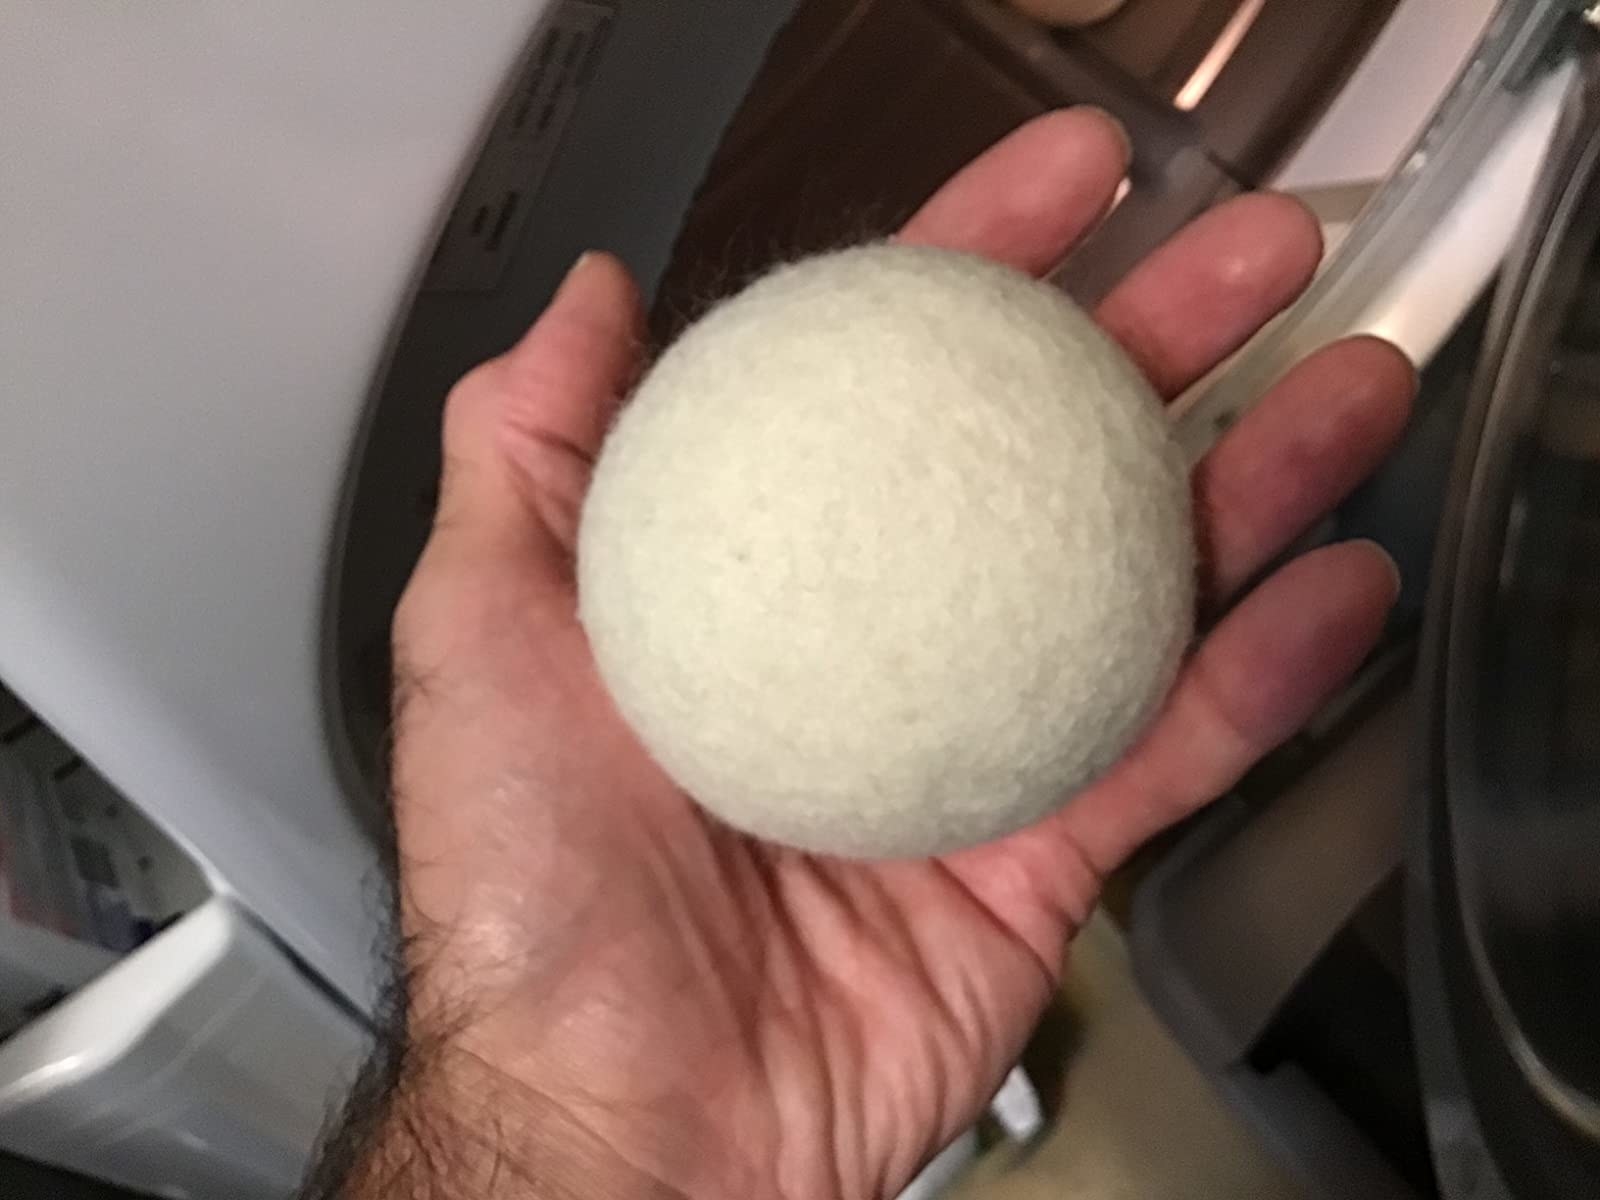 Reviewer holding dryer ball